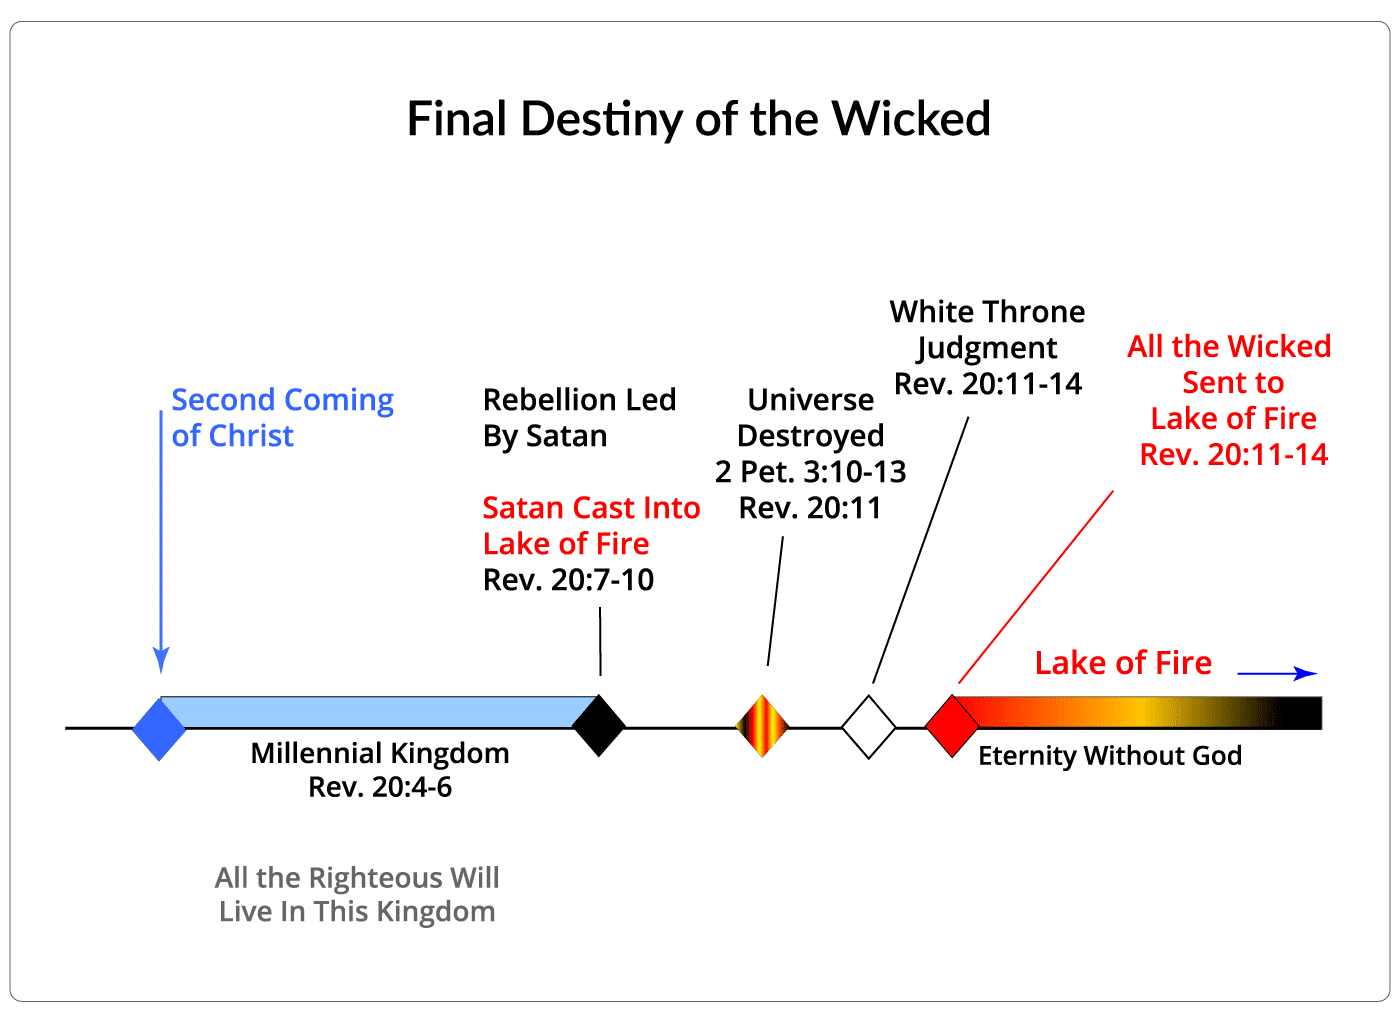 Final Destiny of the Wicked Dead